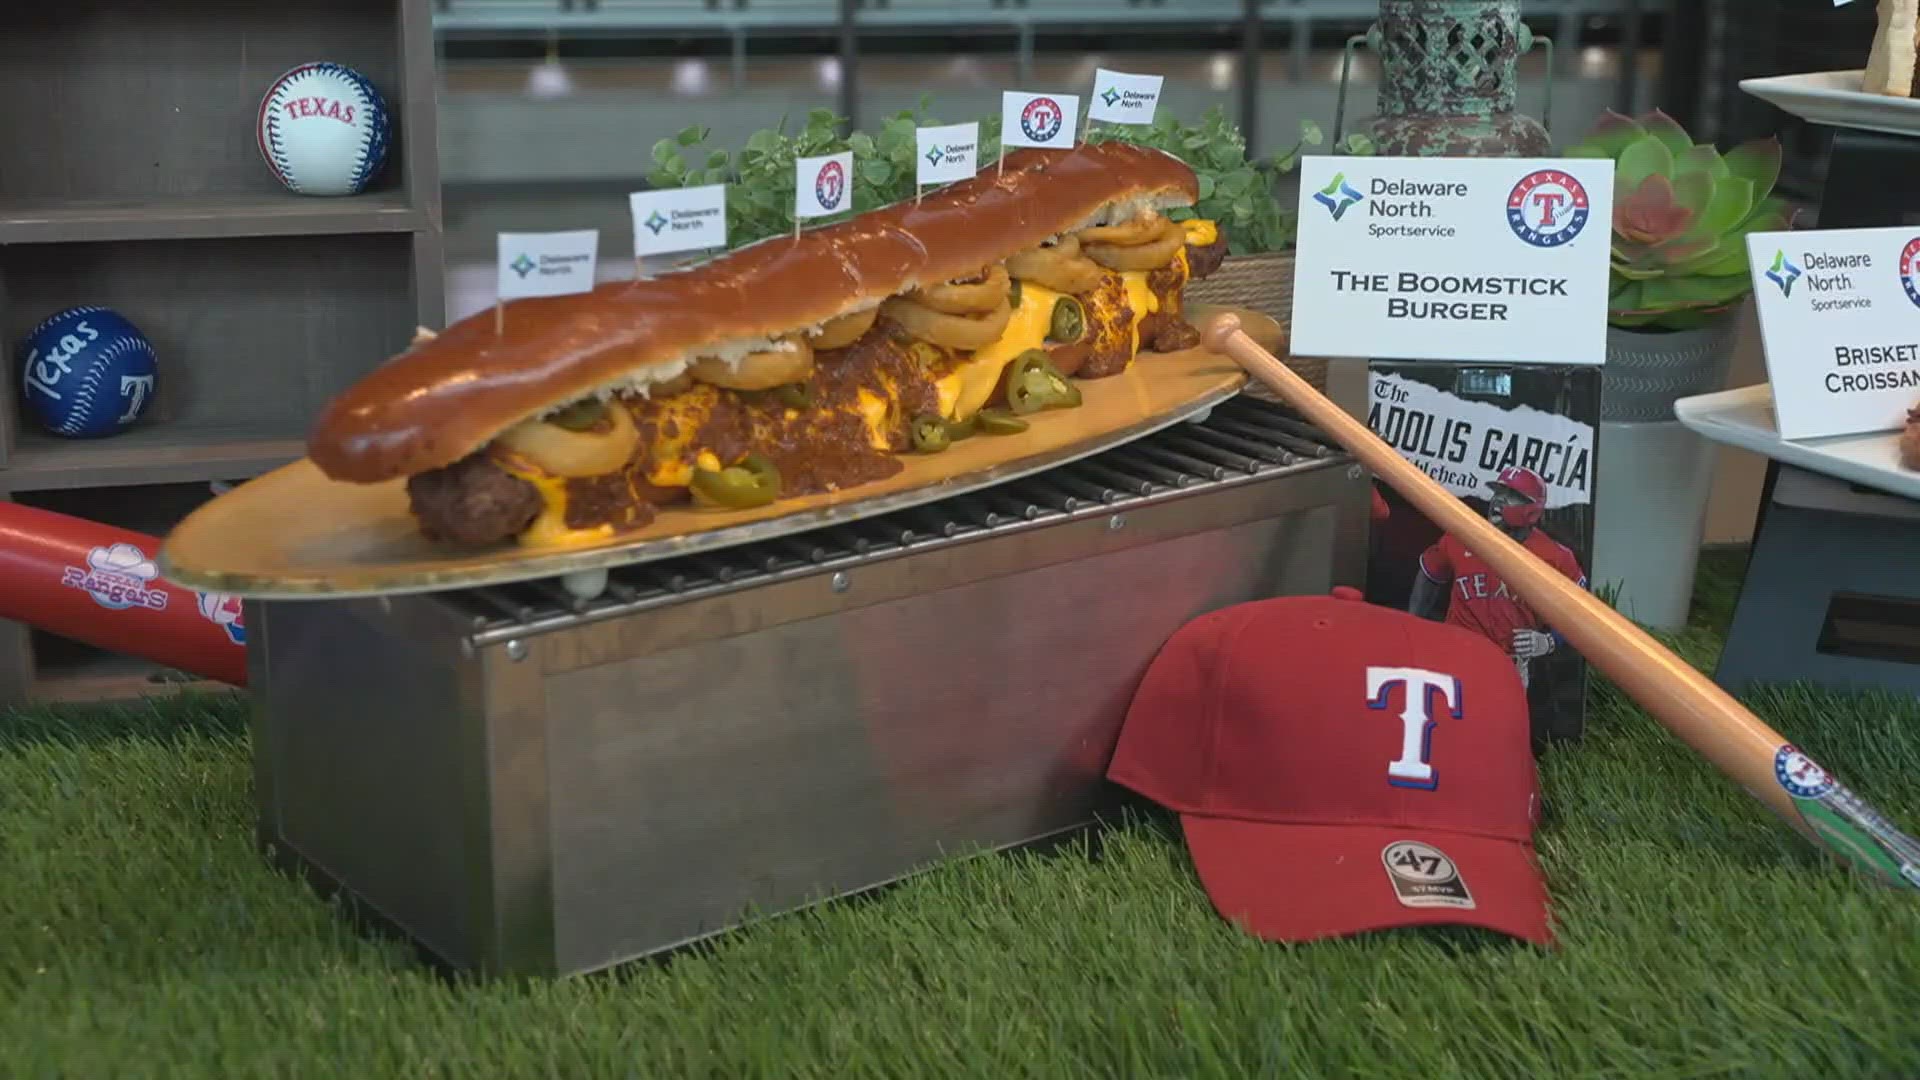 The Texas Rangers Opening Day is Thursday. And that means a new lineup of, um, interesting food items.